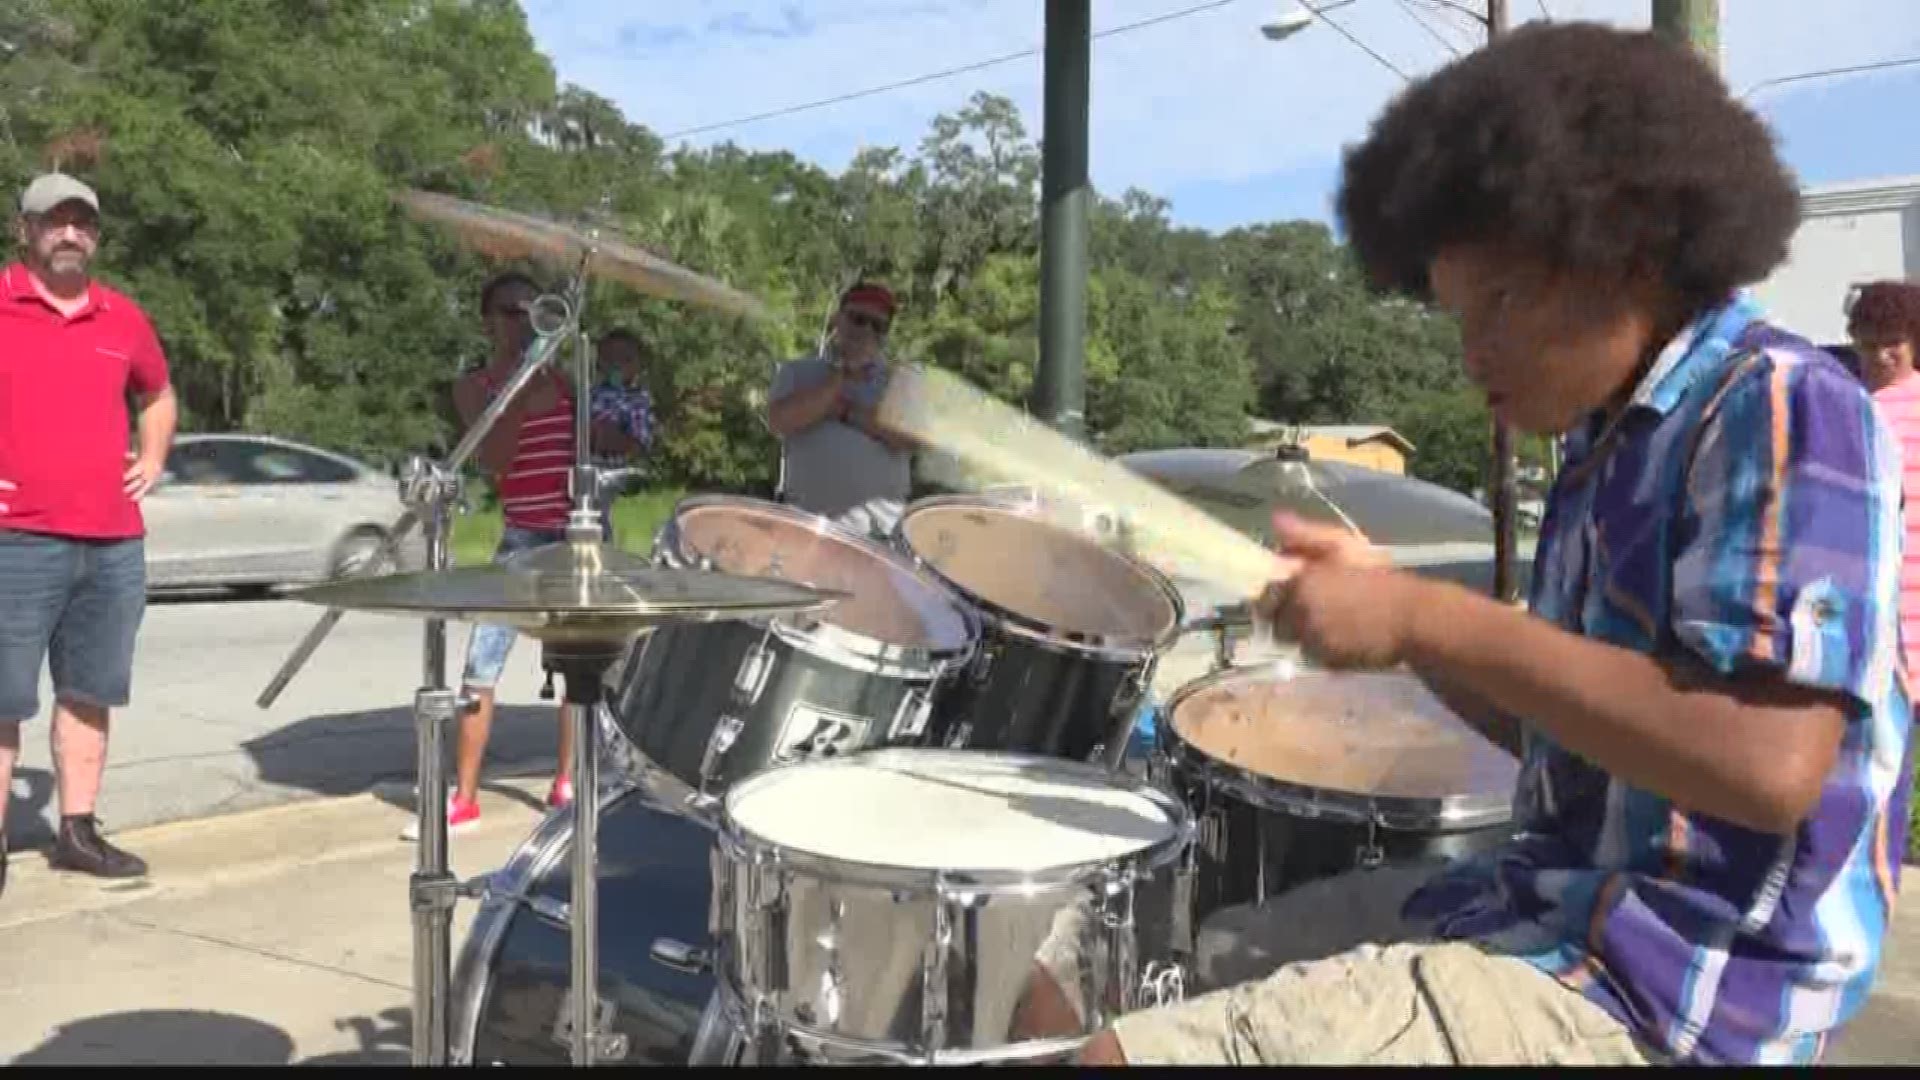 A Brunswick teen who played a set of buckets like drums now has a drum set of his own, thanks to the generosity of strangers and new friends.